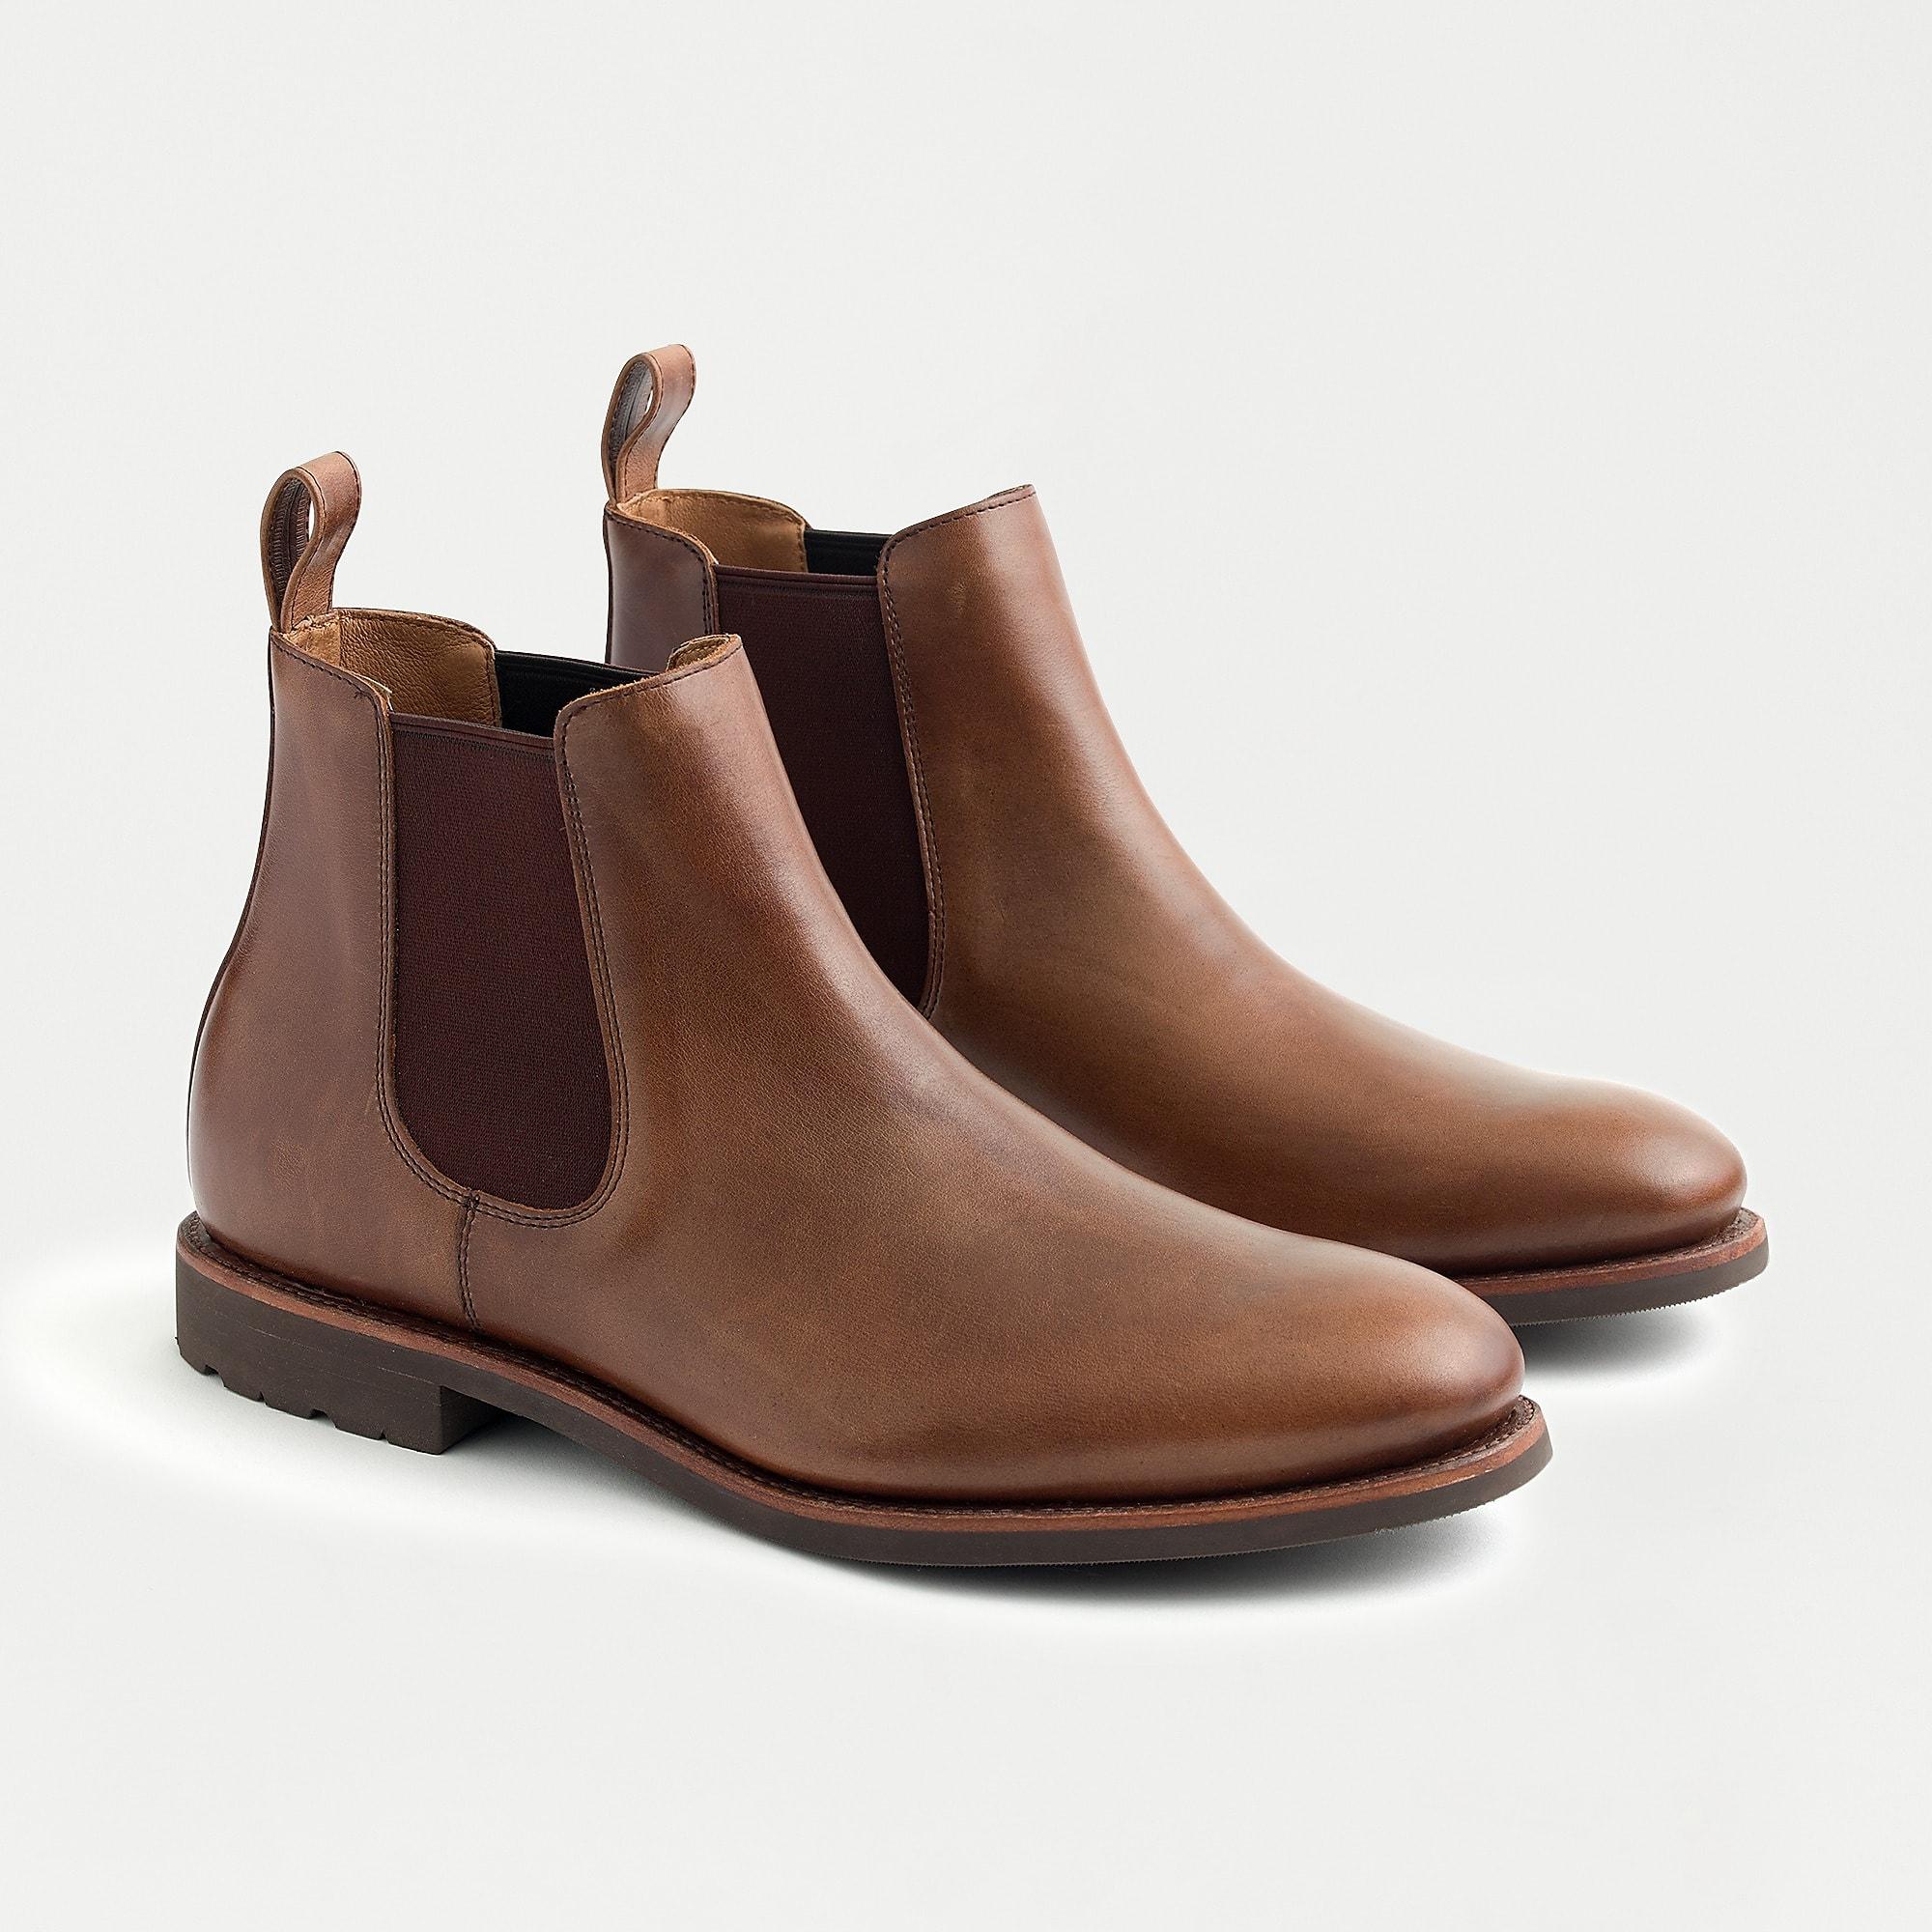 J.Crew Kenton Leather Chelsea Boots in Brown for Men - Lyst